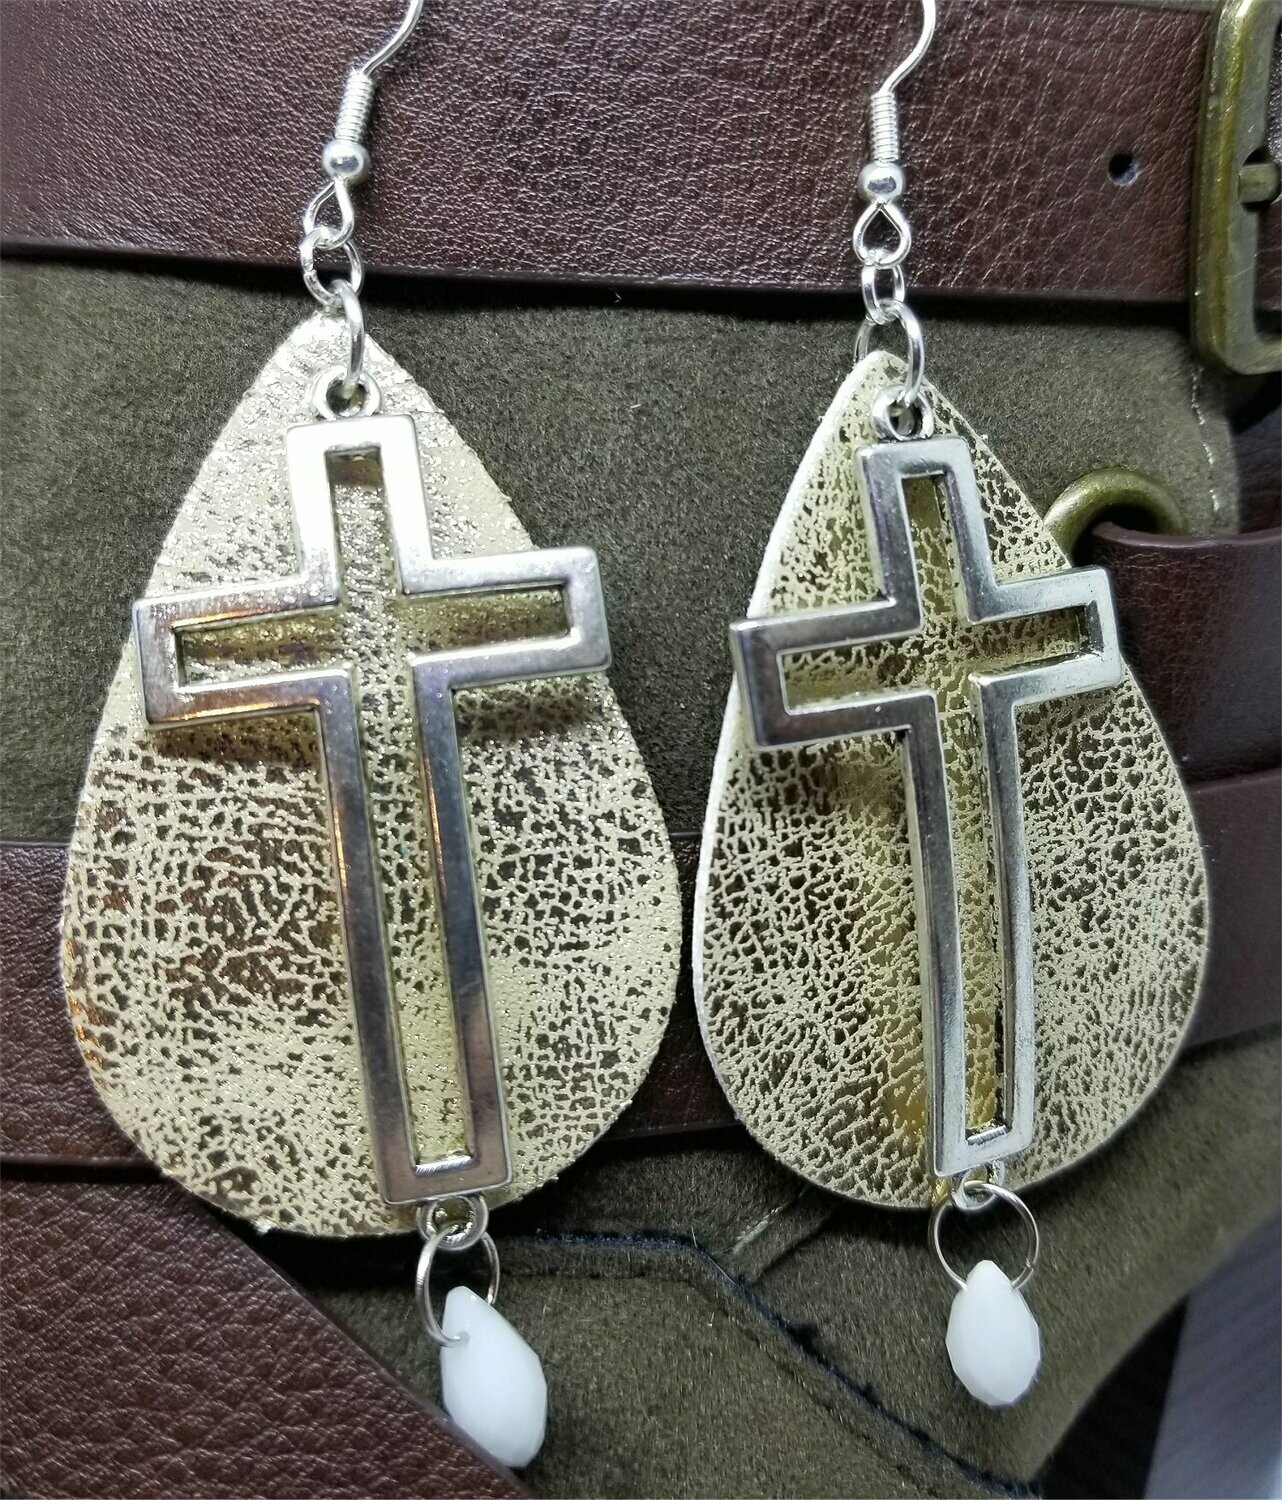 Worn Gold Faux Leather Earrings with Silver Cross and White Alabaster Briolette Crystal Dangles